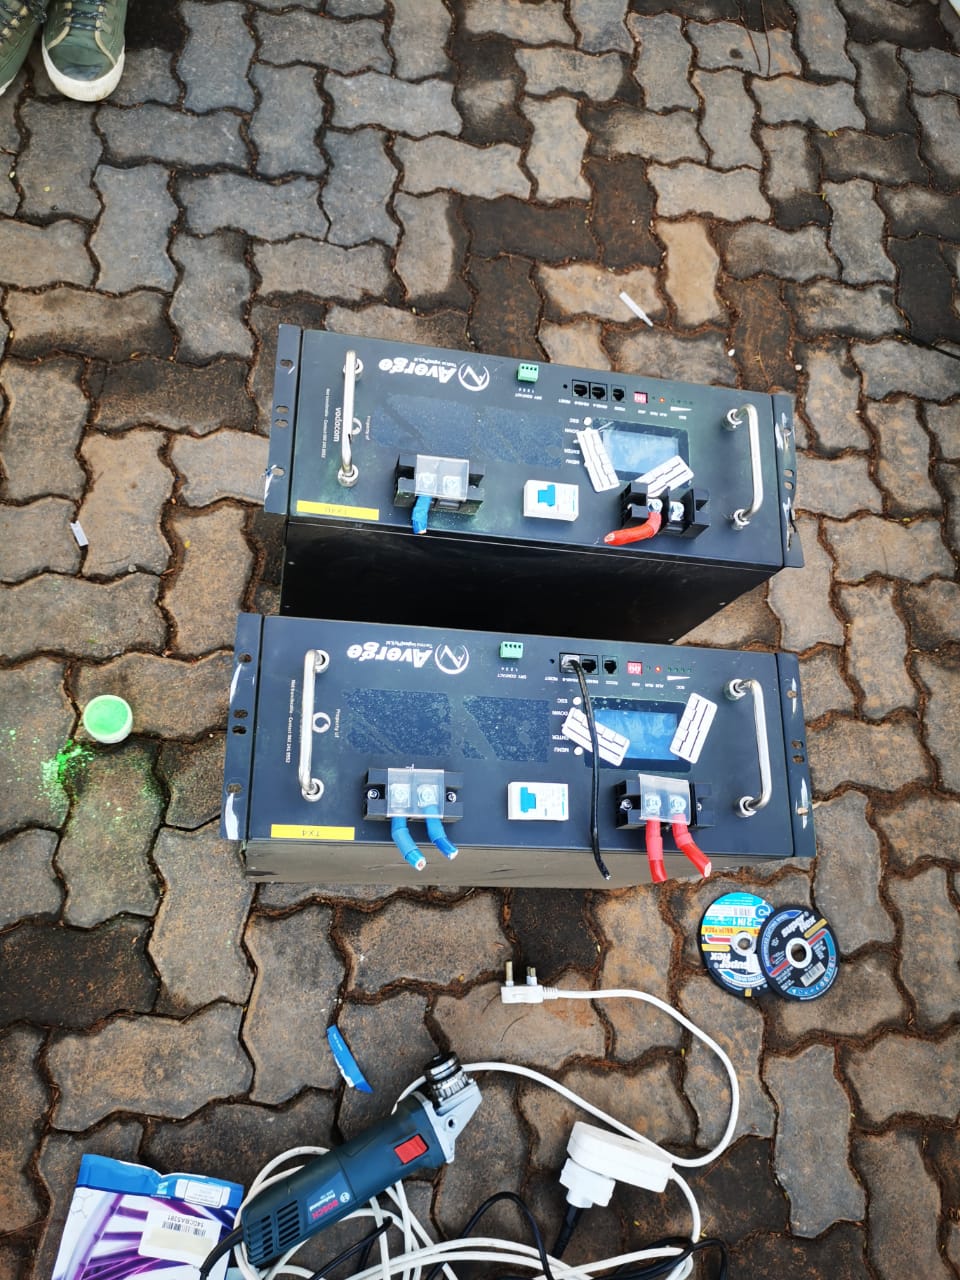 Cellphone tower batteries seized, suspects arrested.